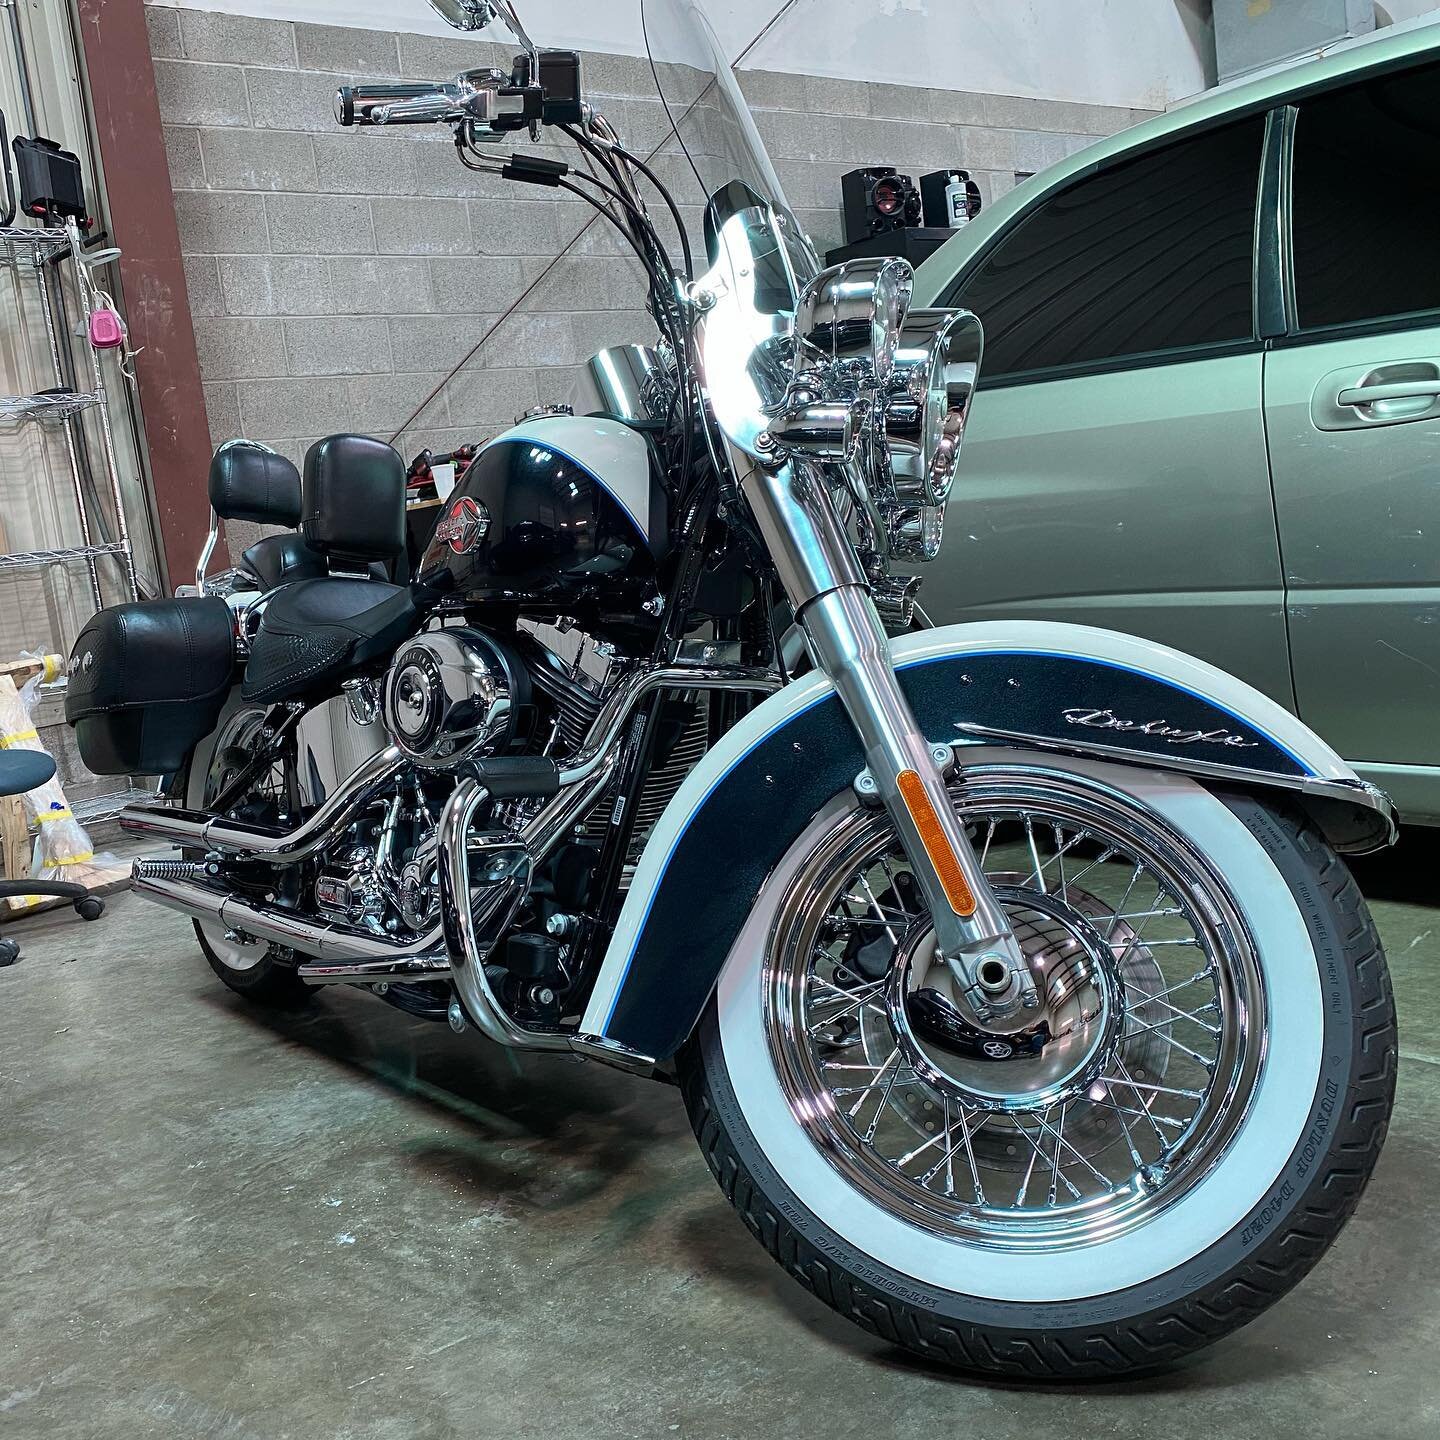 Always fun getting a motorcycle in! This Harley came in for a thorough wash, bug removal, and chrome polishing. #pittsburghdetailing #harleybikelife #harleydavidson #harleymotorcycles @detailkingofficial #seriouslyclean